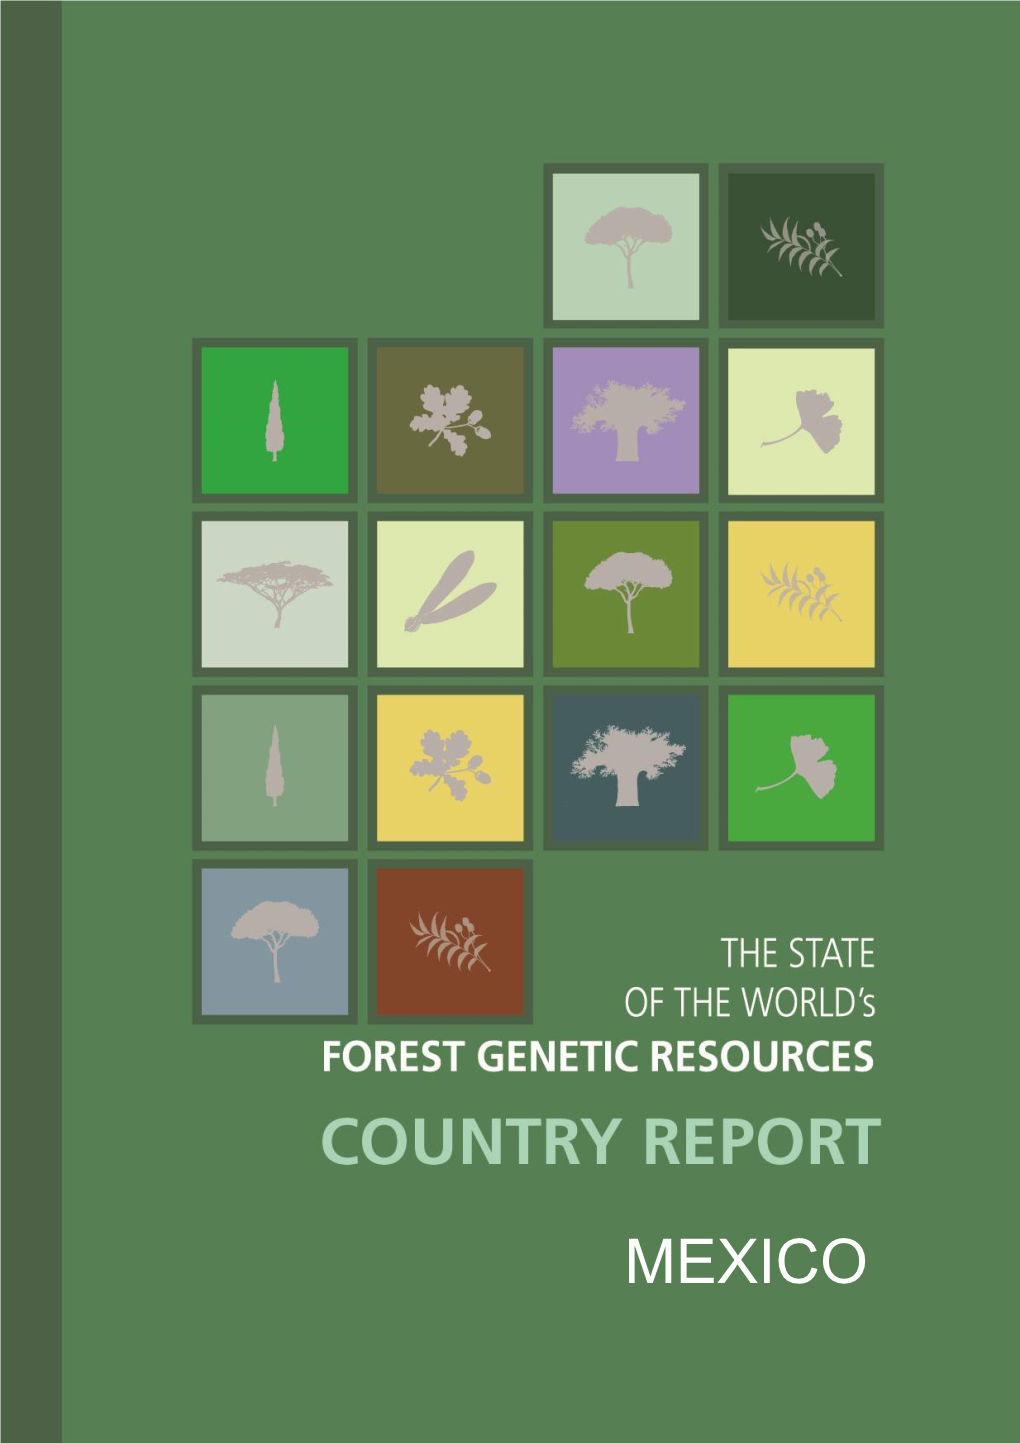 The State of the World's Forest Genetic Resources: Country Report